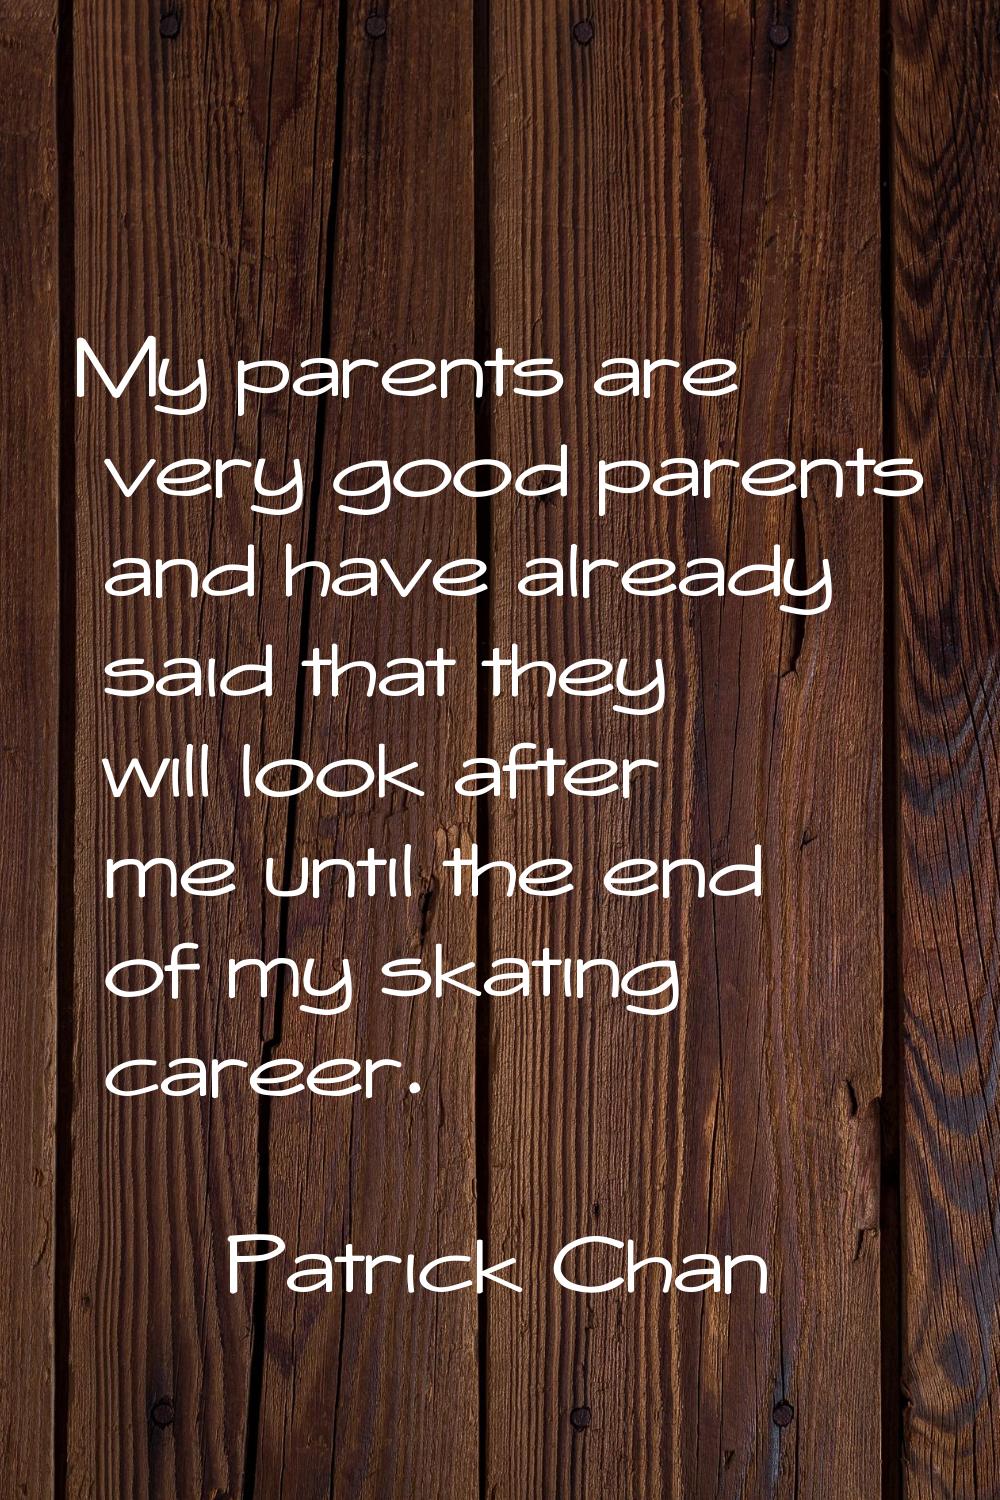 My parents are very good parents and have already said that they will look after me until the end o